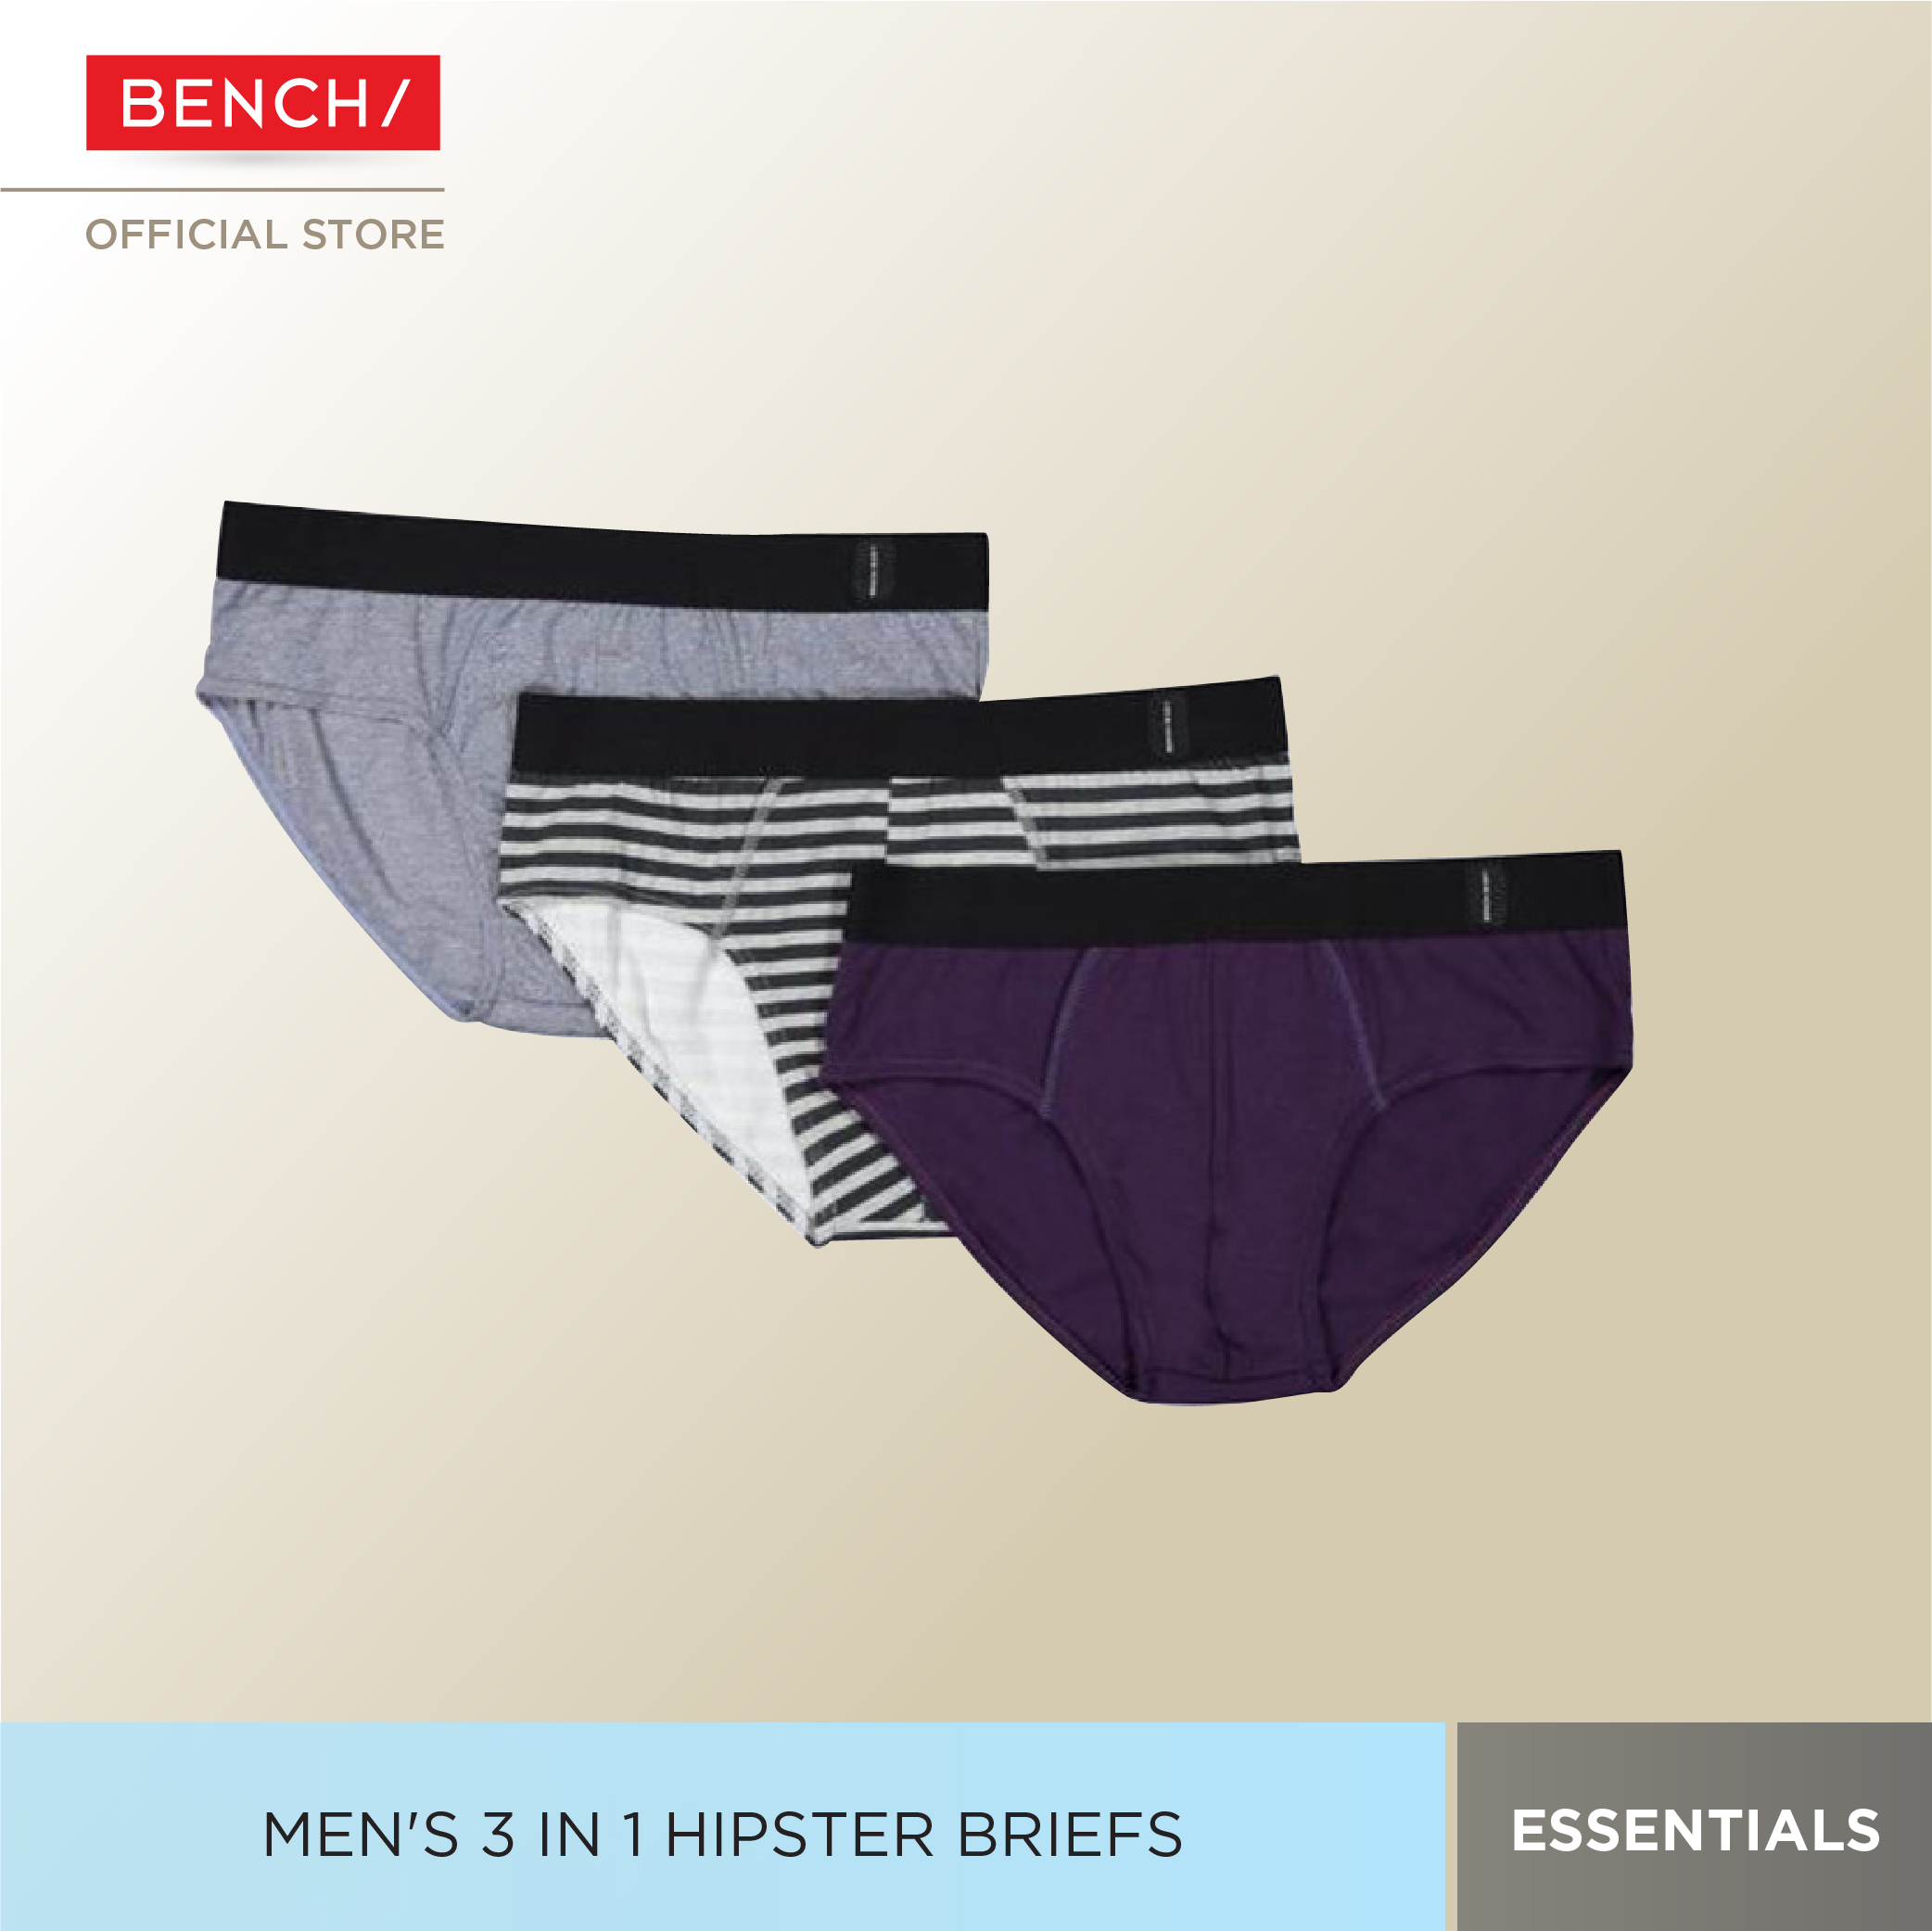 BENCH- TUB0313 Men's 3-in-1 Hipster Brief